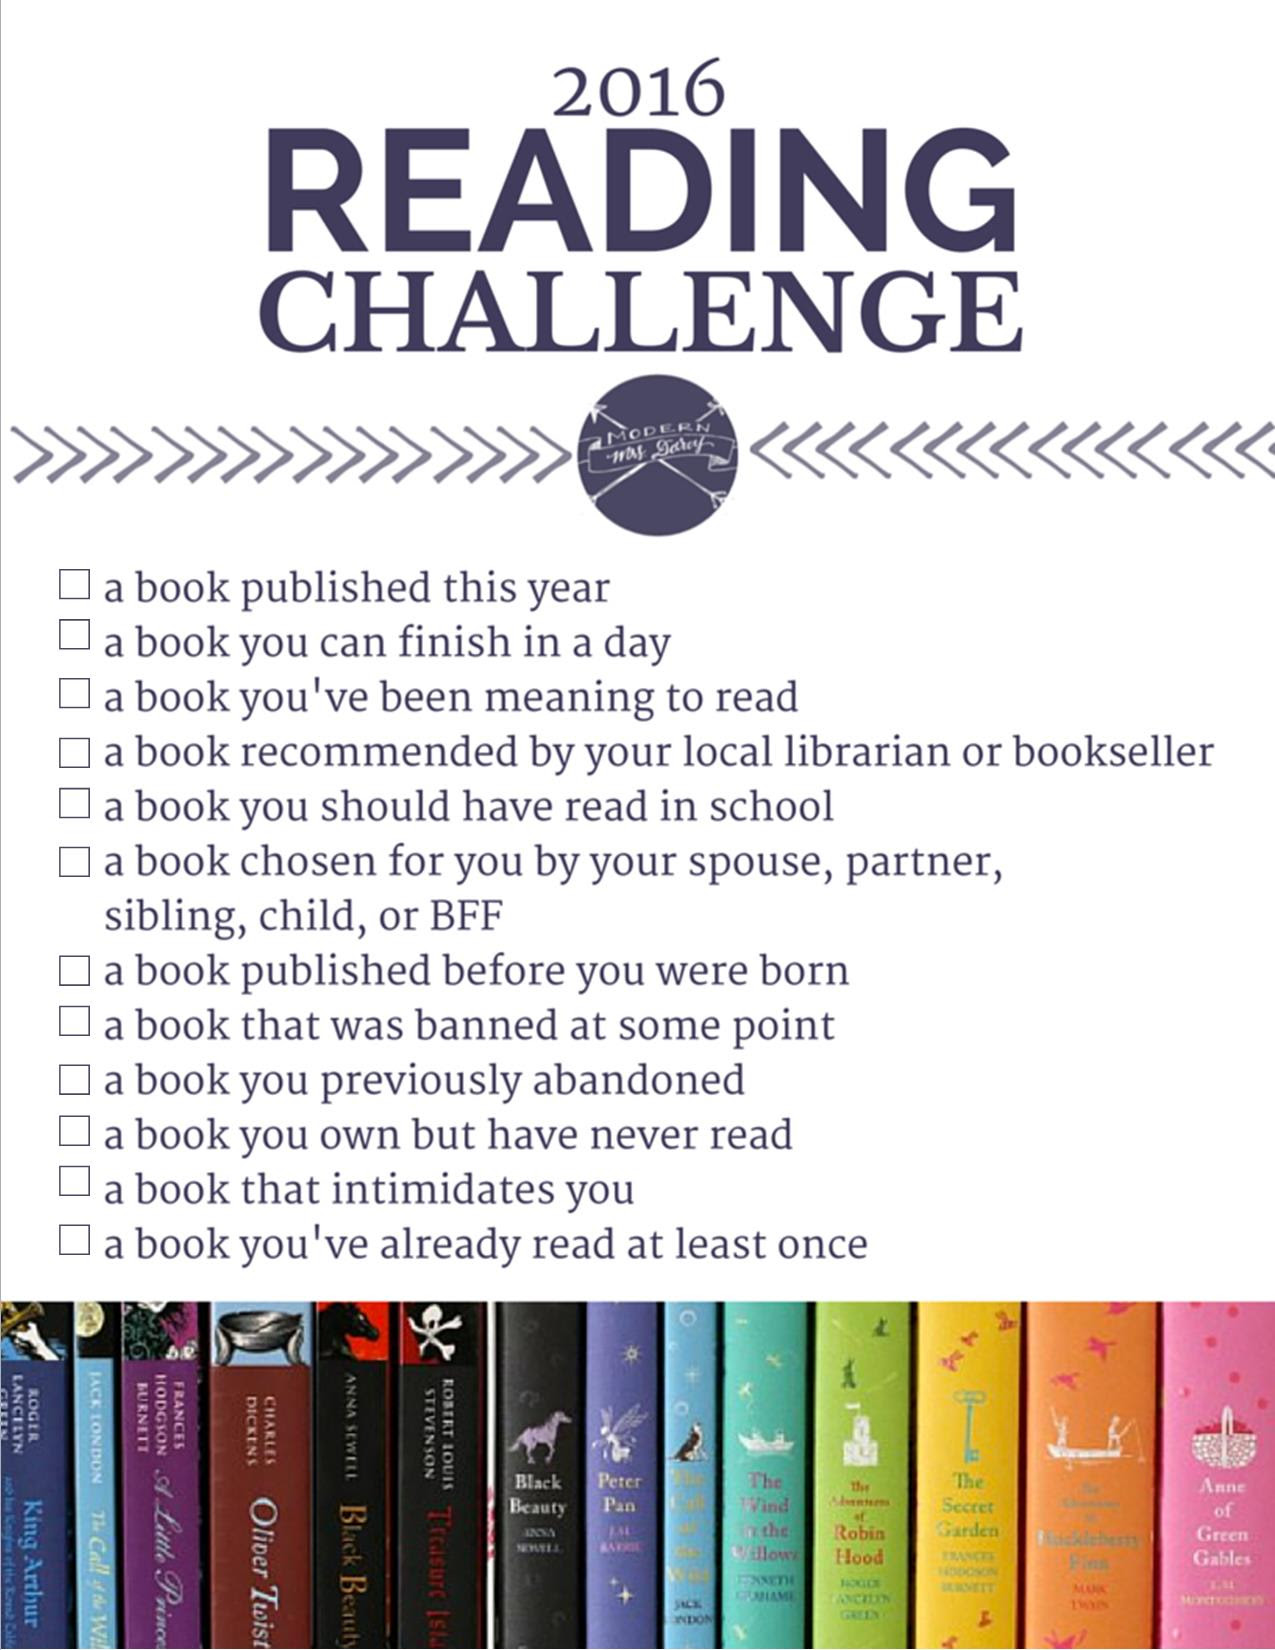 Make 2016 your best reading year yet with this reading challenge. It’s simple and doable, but provides the structure you need to approach your reading list with intention in 2016.